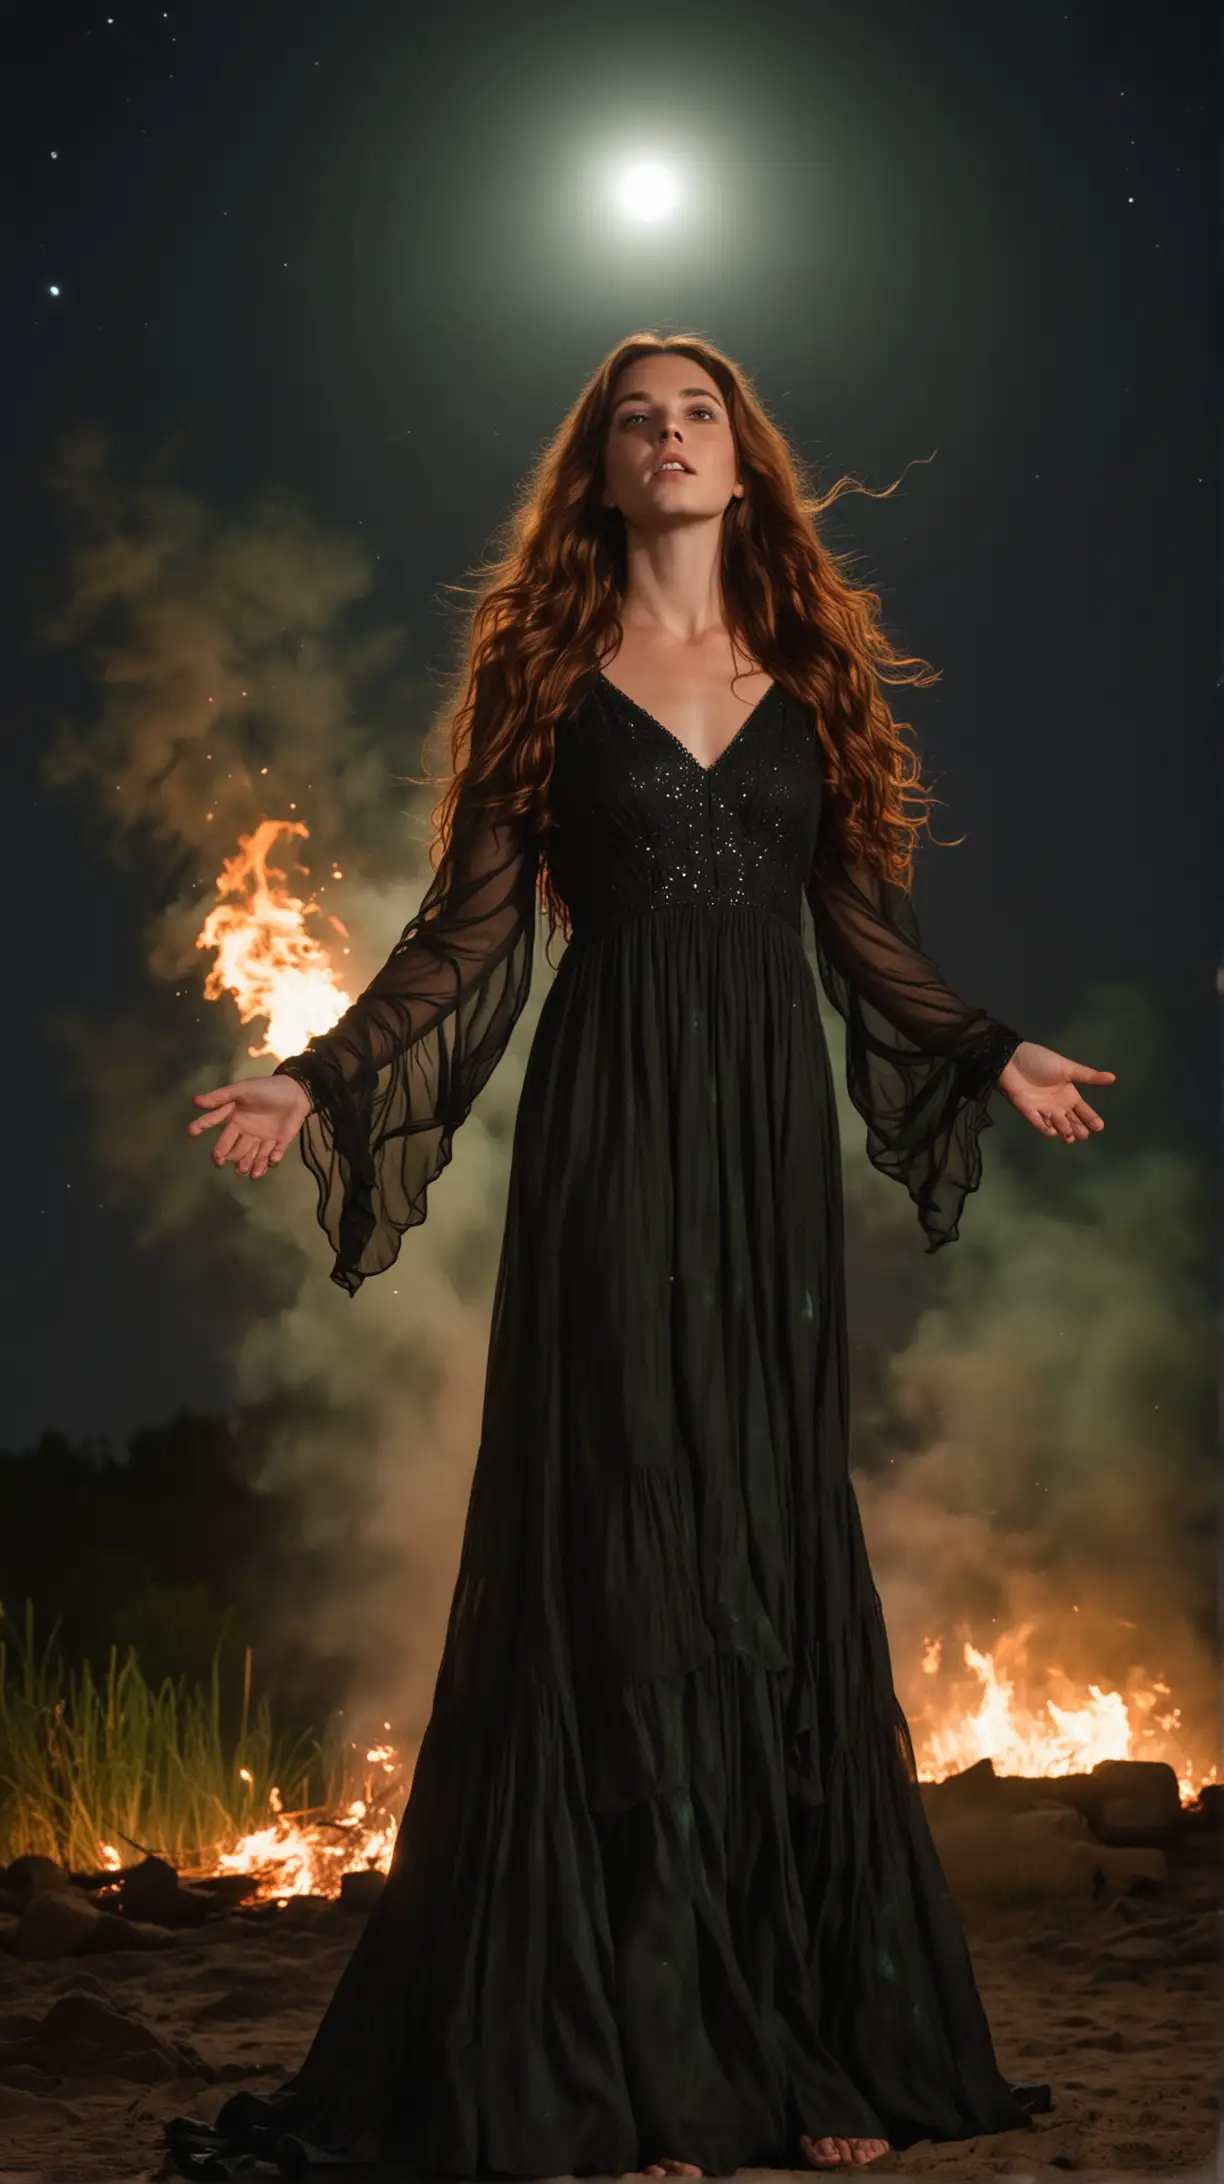 18-year-old Julie Roberts. She has long, wavy, dark-auburn hair, and intense green eyes. She is standing in flames wearing a black flowy dress under the moonlight. Her palms are outstretched and she is looking up at the sky